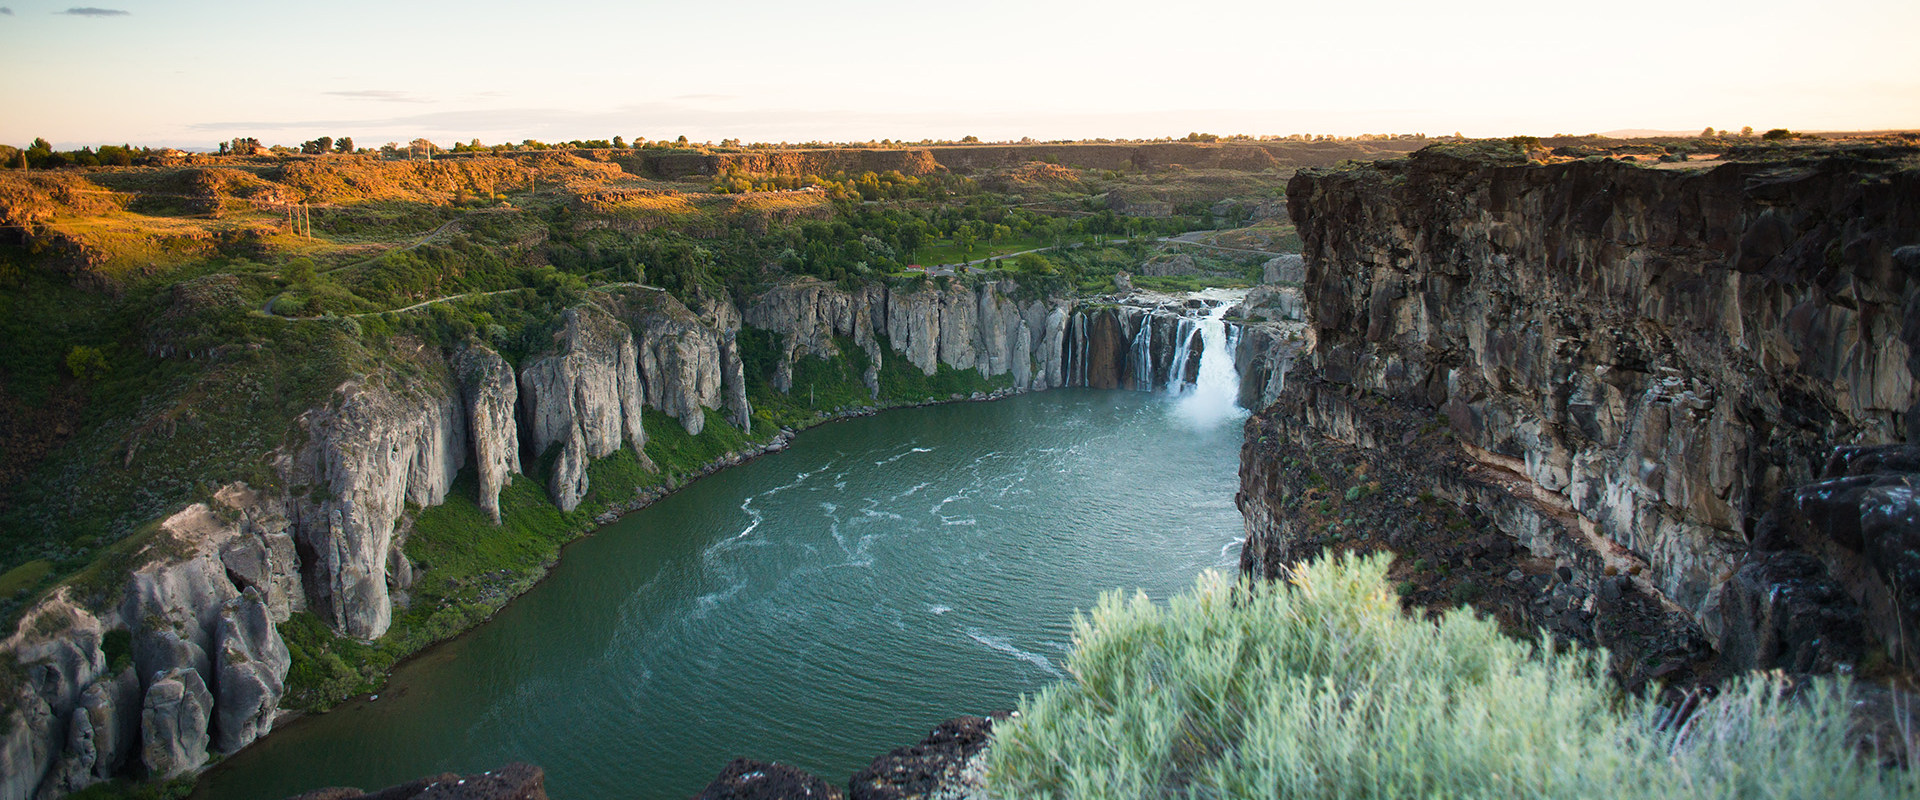 The Long-Term Benefits of Utilizing Energy Resources in Post Falls, Idaho